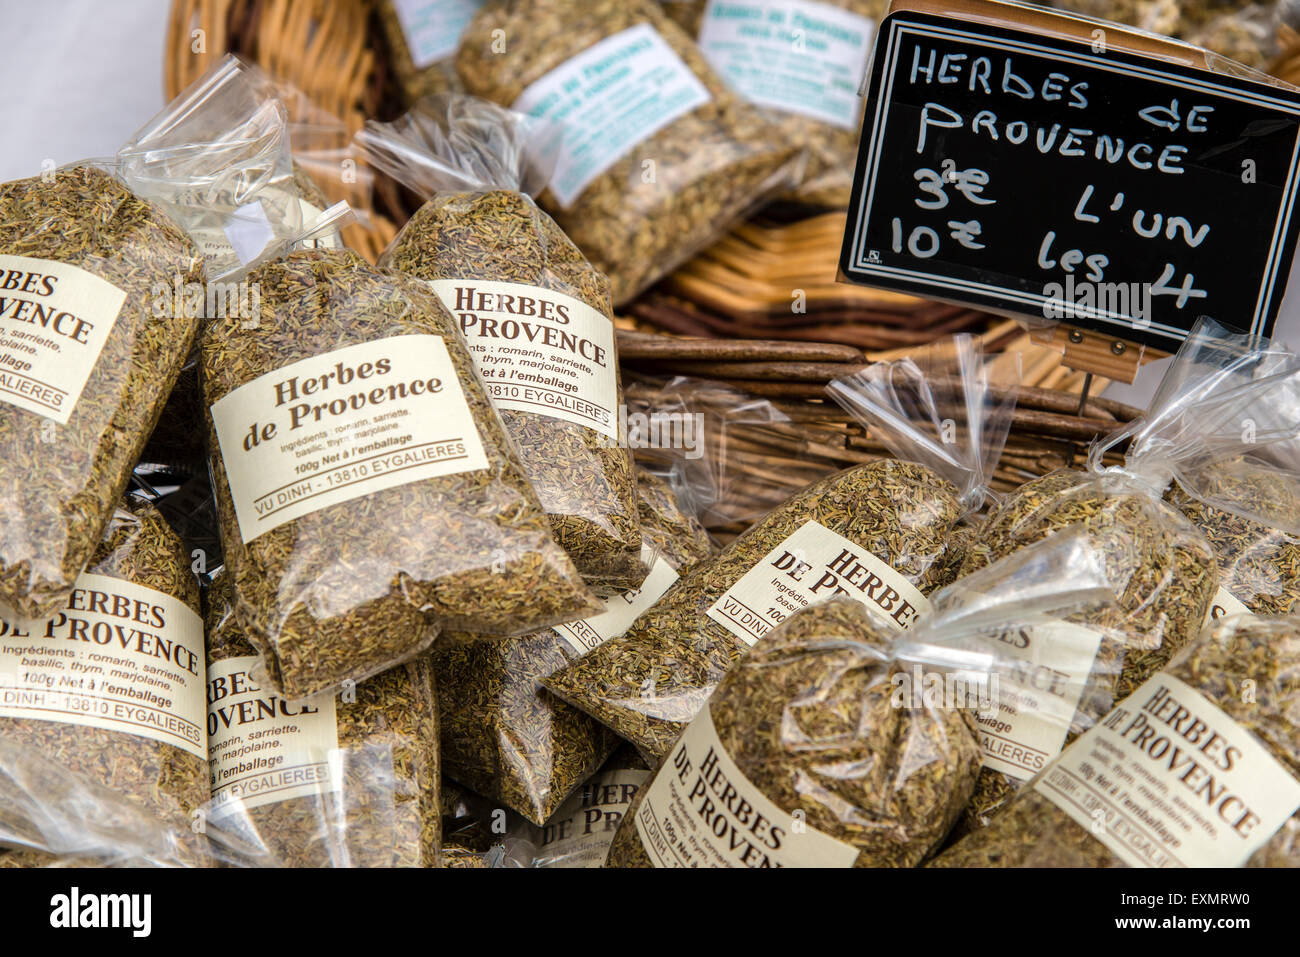 Herbs of Provence sachets on sale at the market, Carpentras, Provence, France Stock Photo